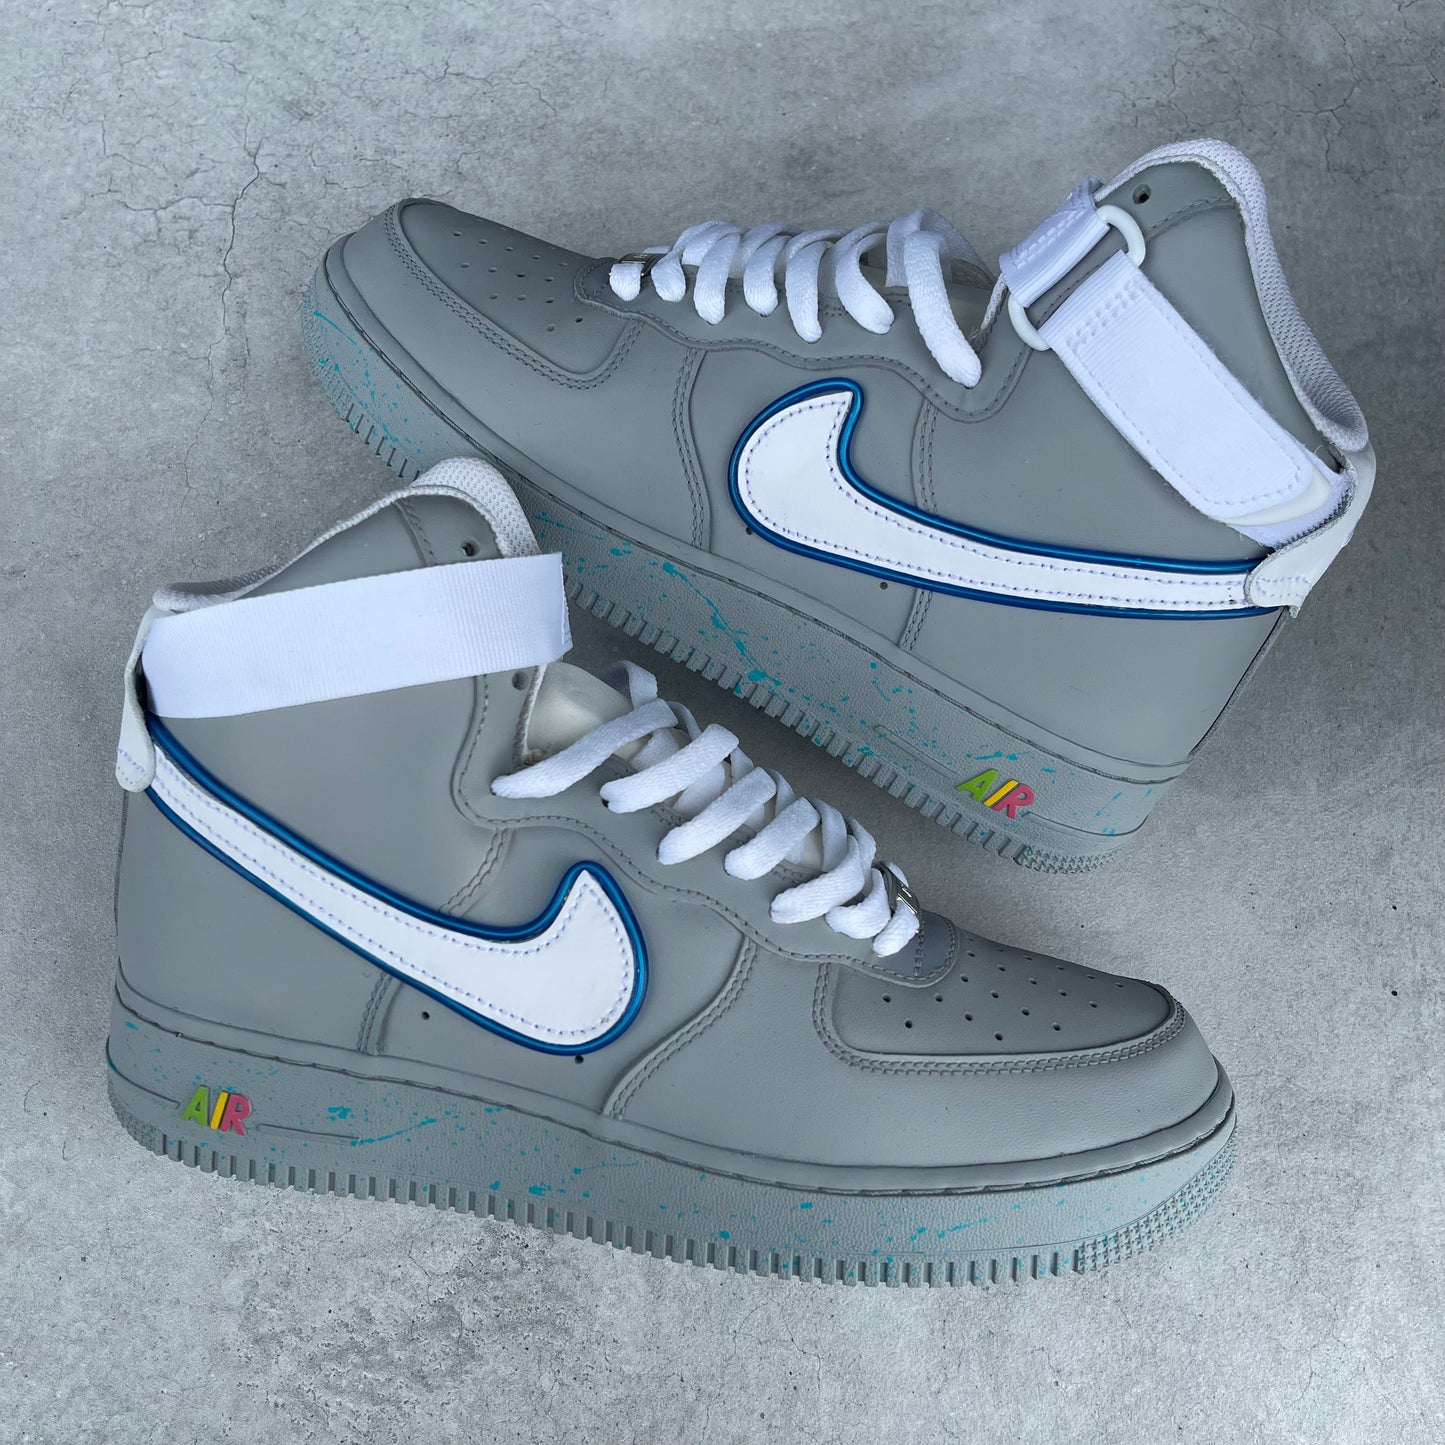 Custom AIR FORCE 1 high - Air Mag inspired (with led lights)